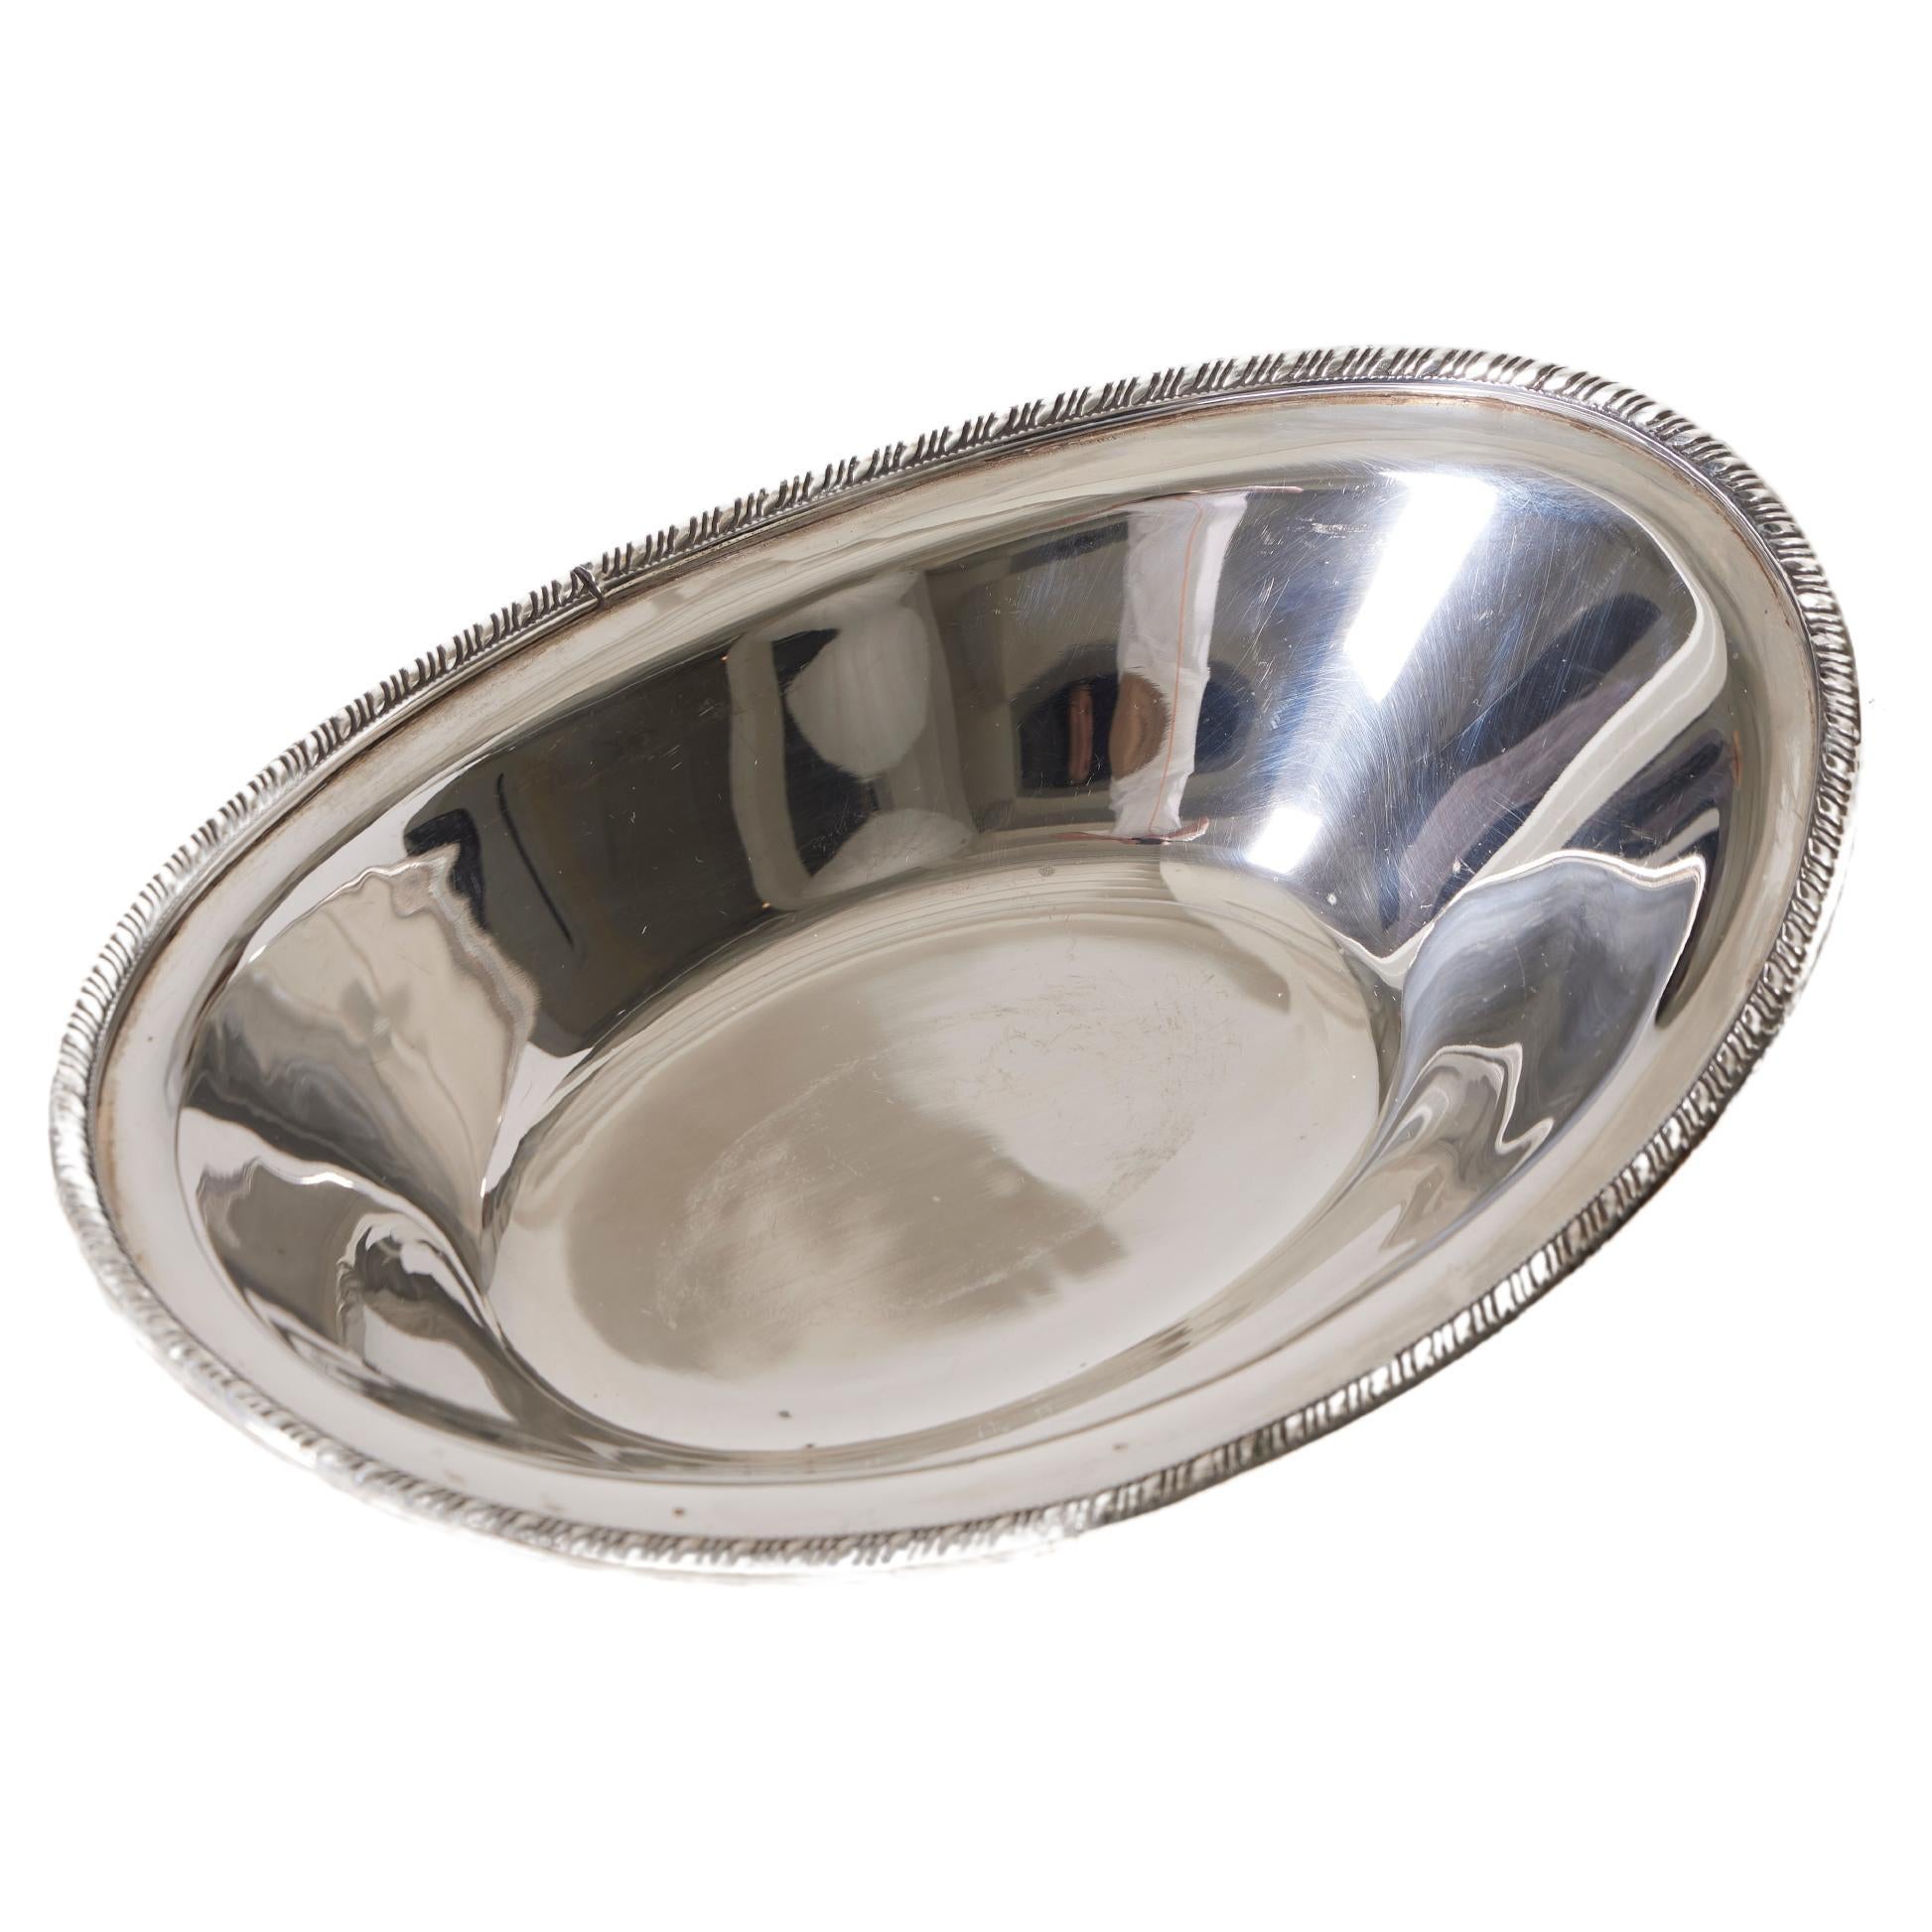 Silver-plated bread basket